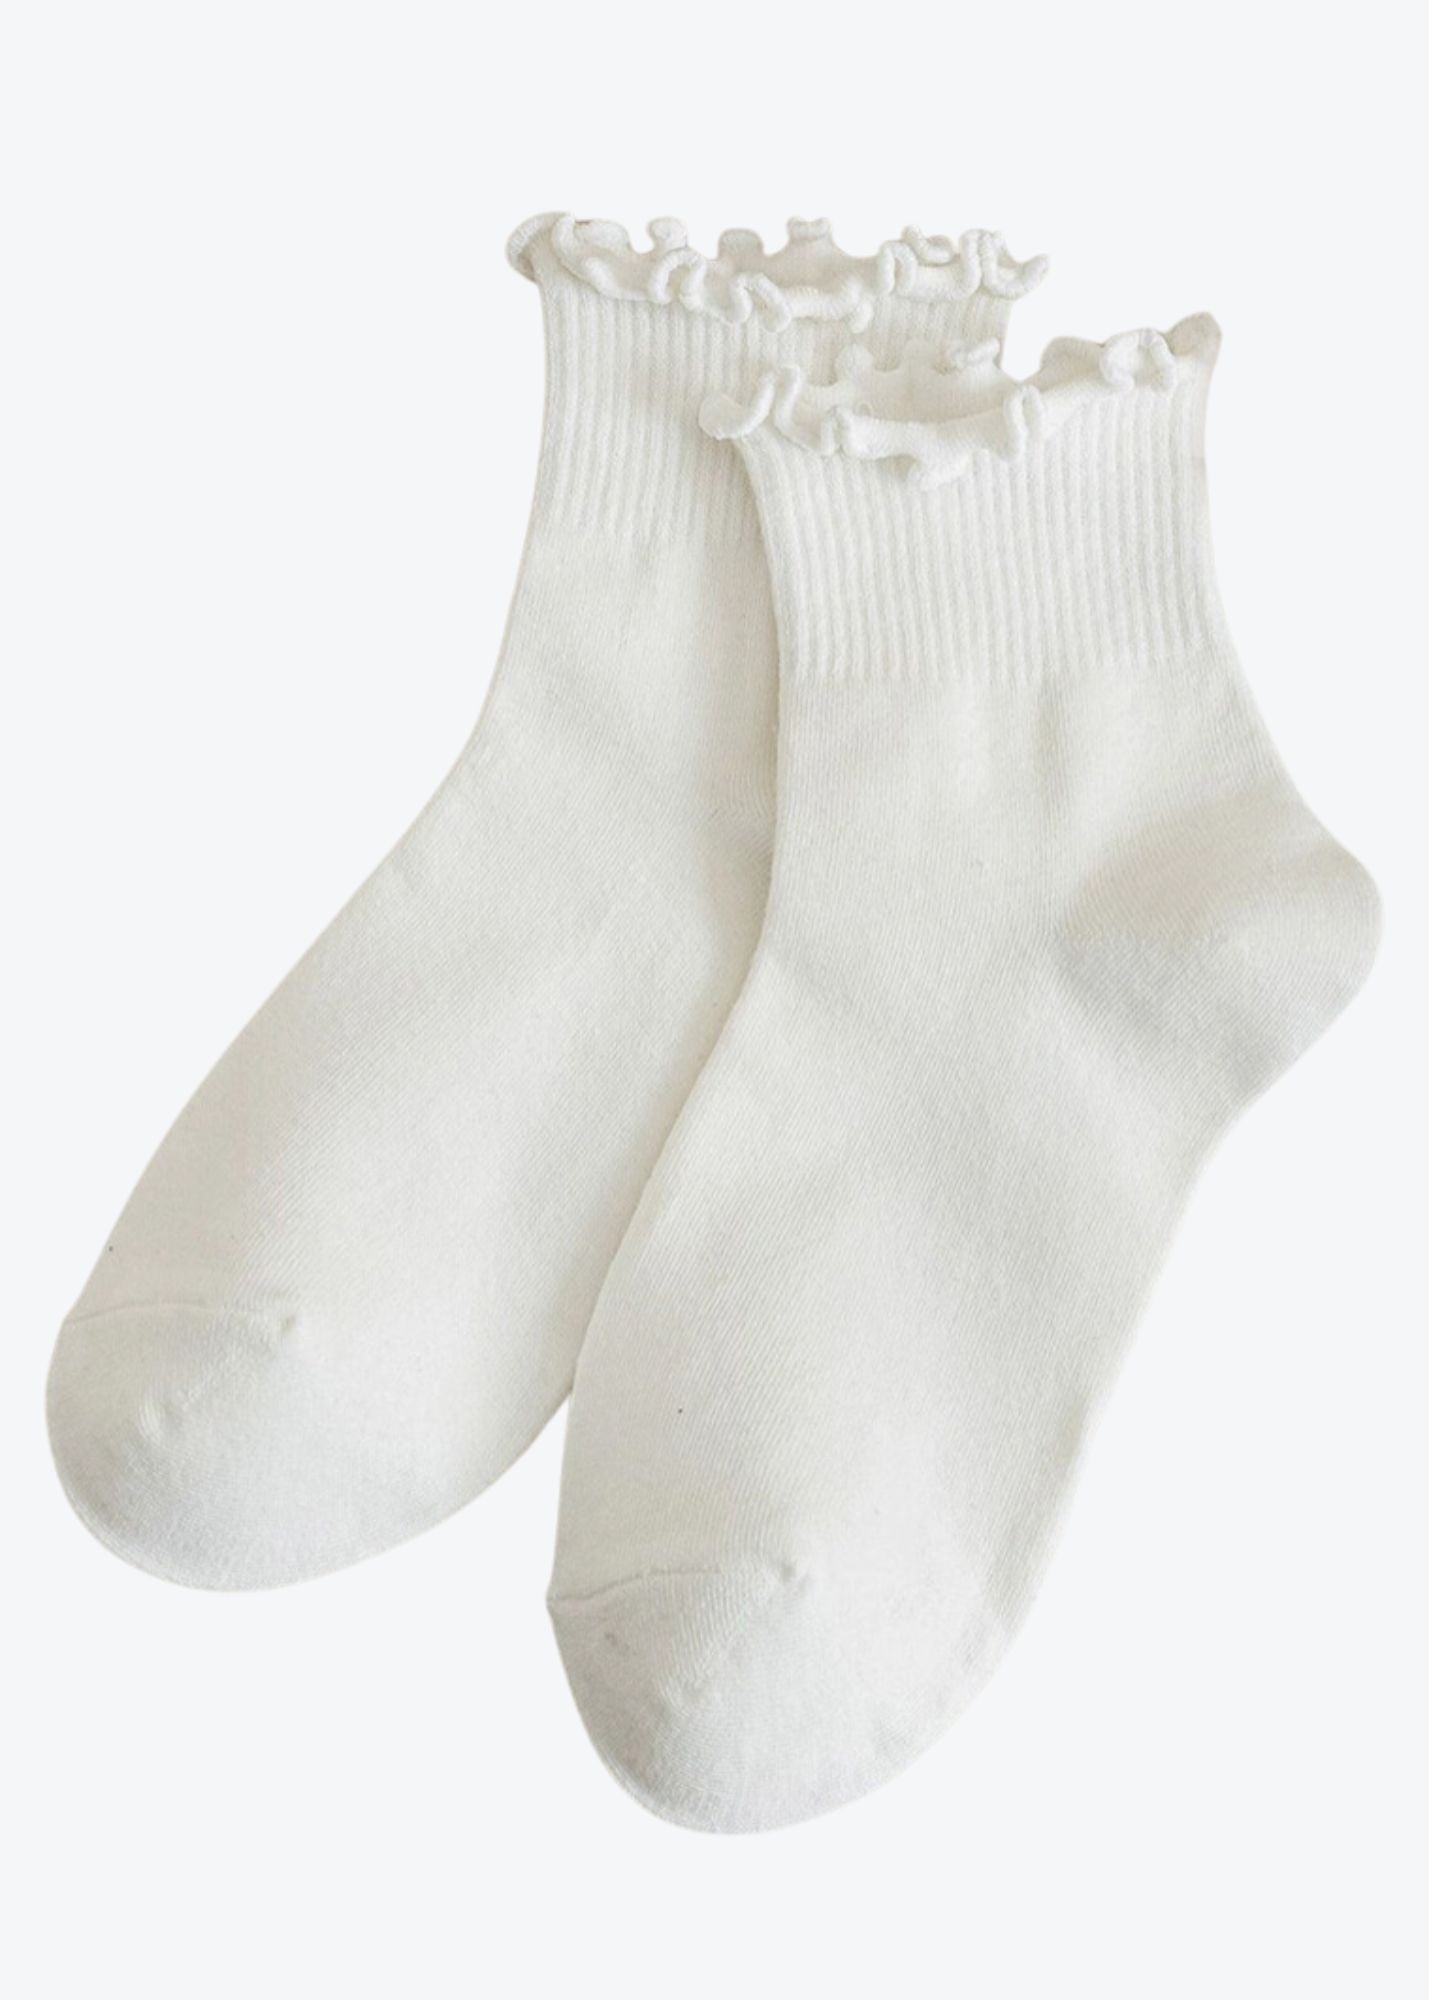 Ruffled Ankle Socks Accessories White